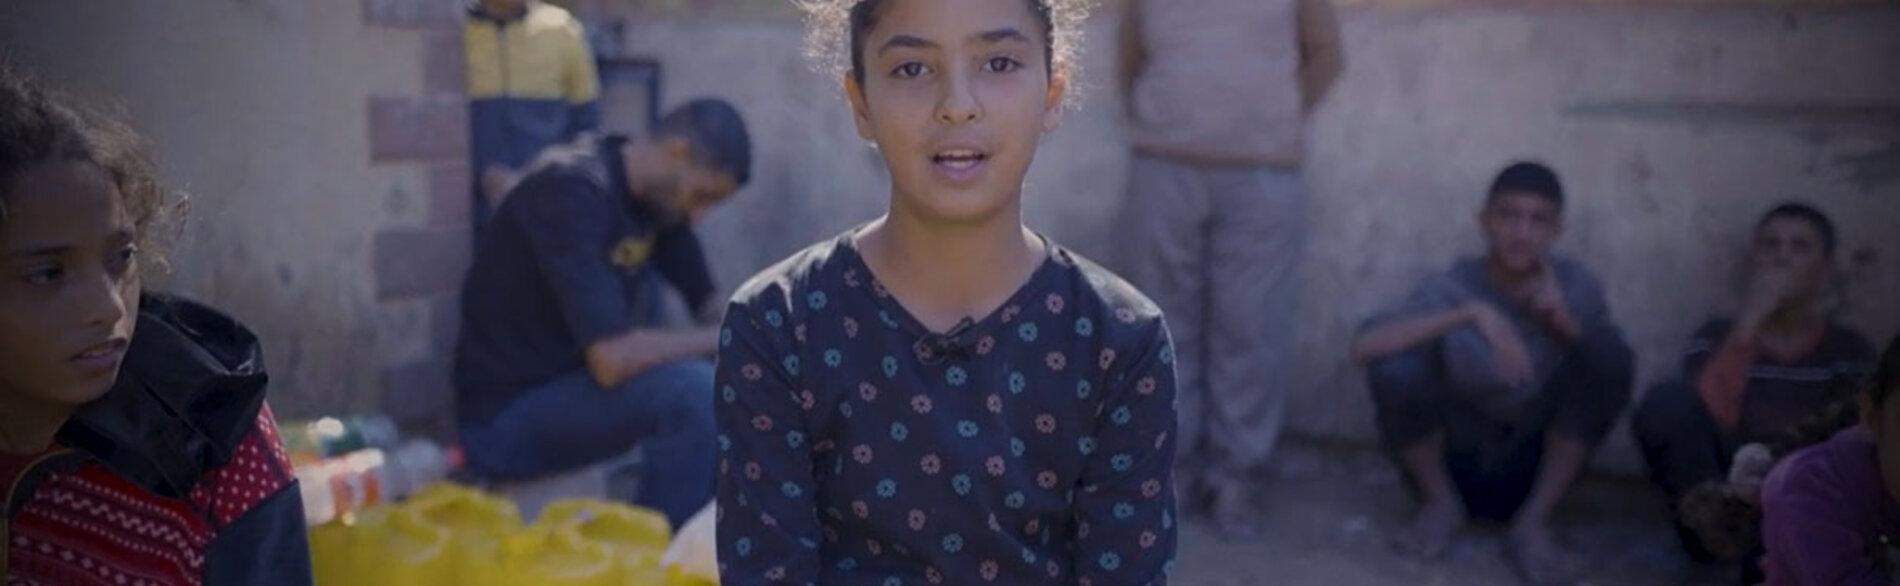 “Before the war, my dream was to become a doctor, so I can treat people.” On World´s Children Day, Humanitarian Coordinator Lynn Hastings reiterated her appeal “to protect Palestinian and Israeli children and their rights.” Screenshot of a UNICEF video